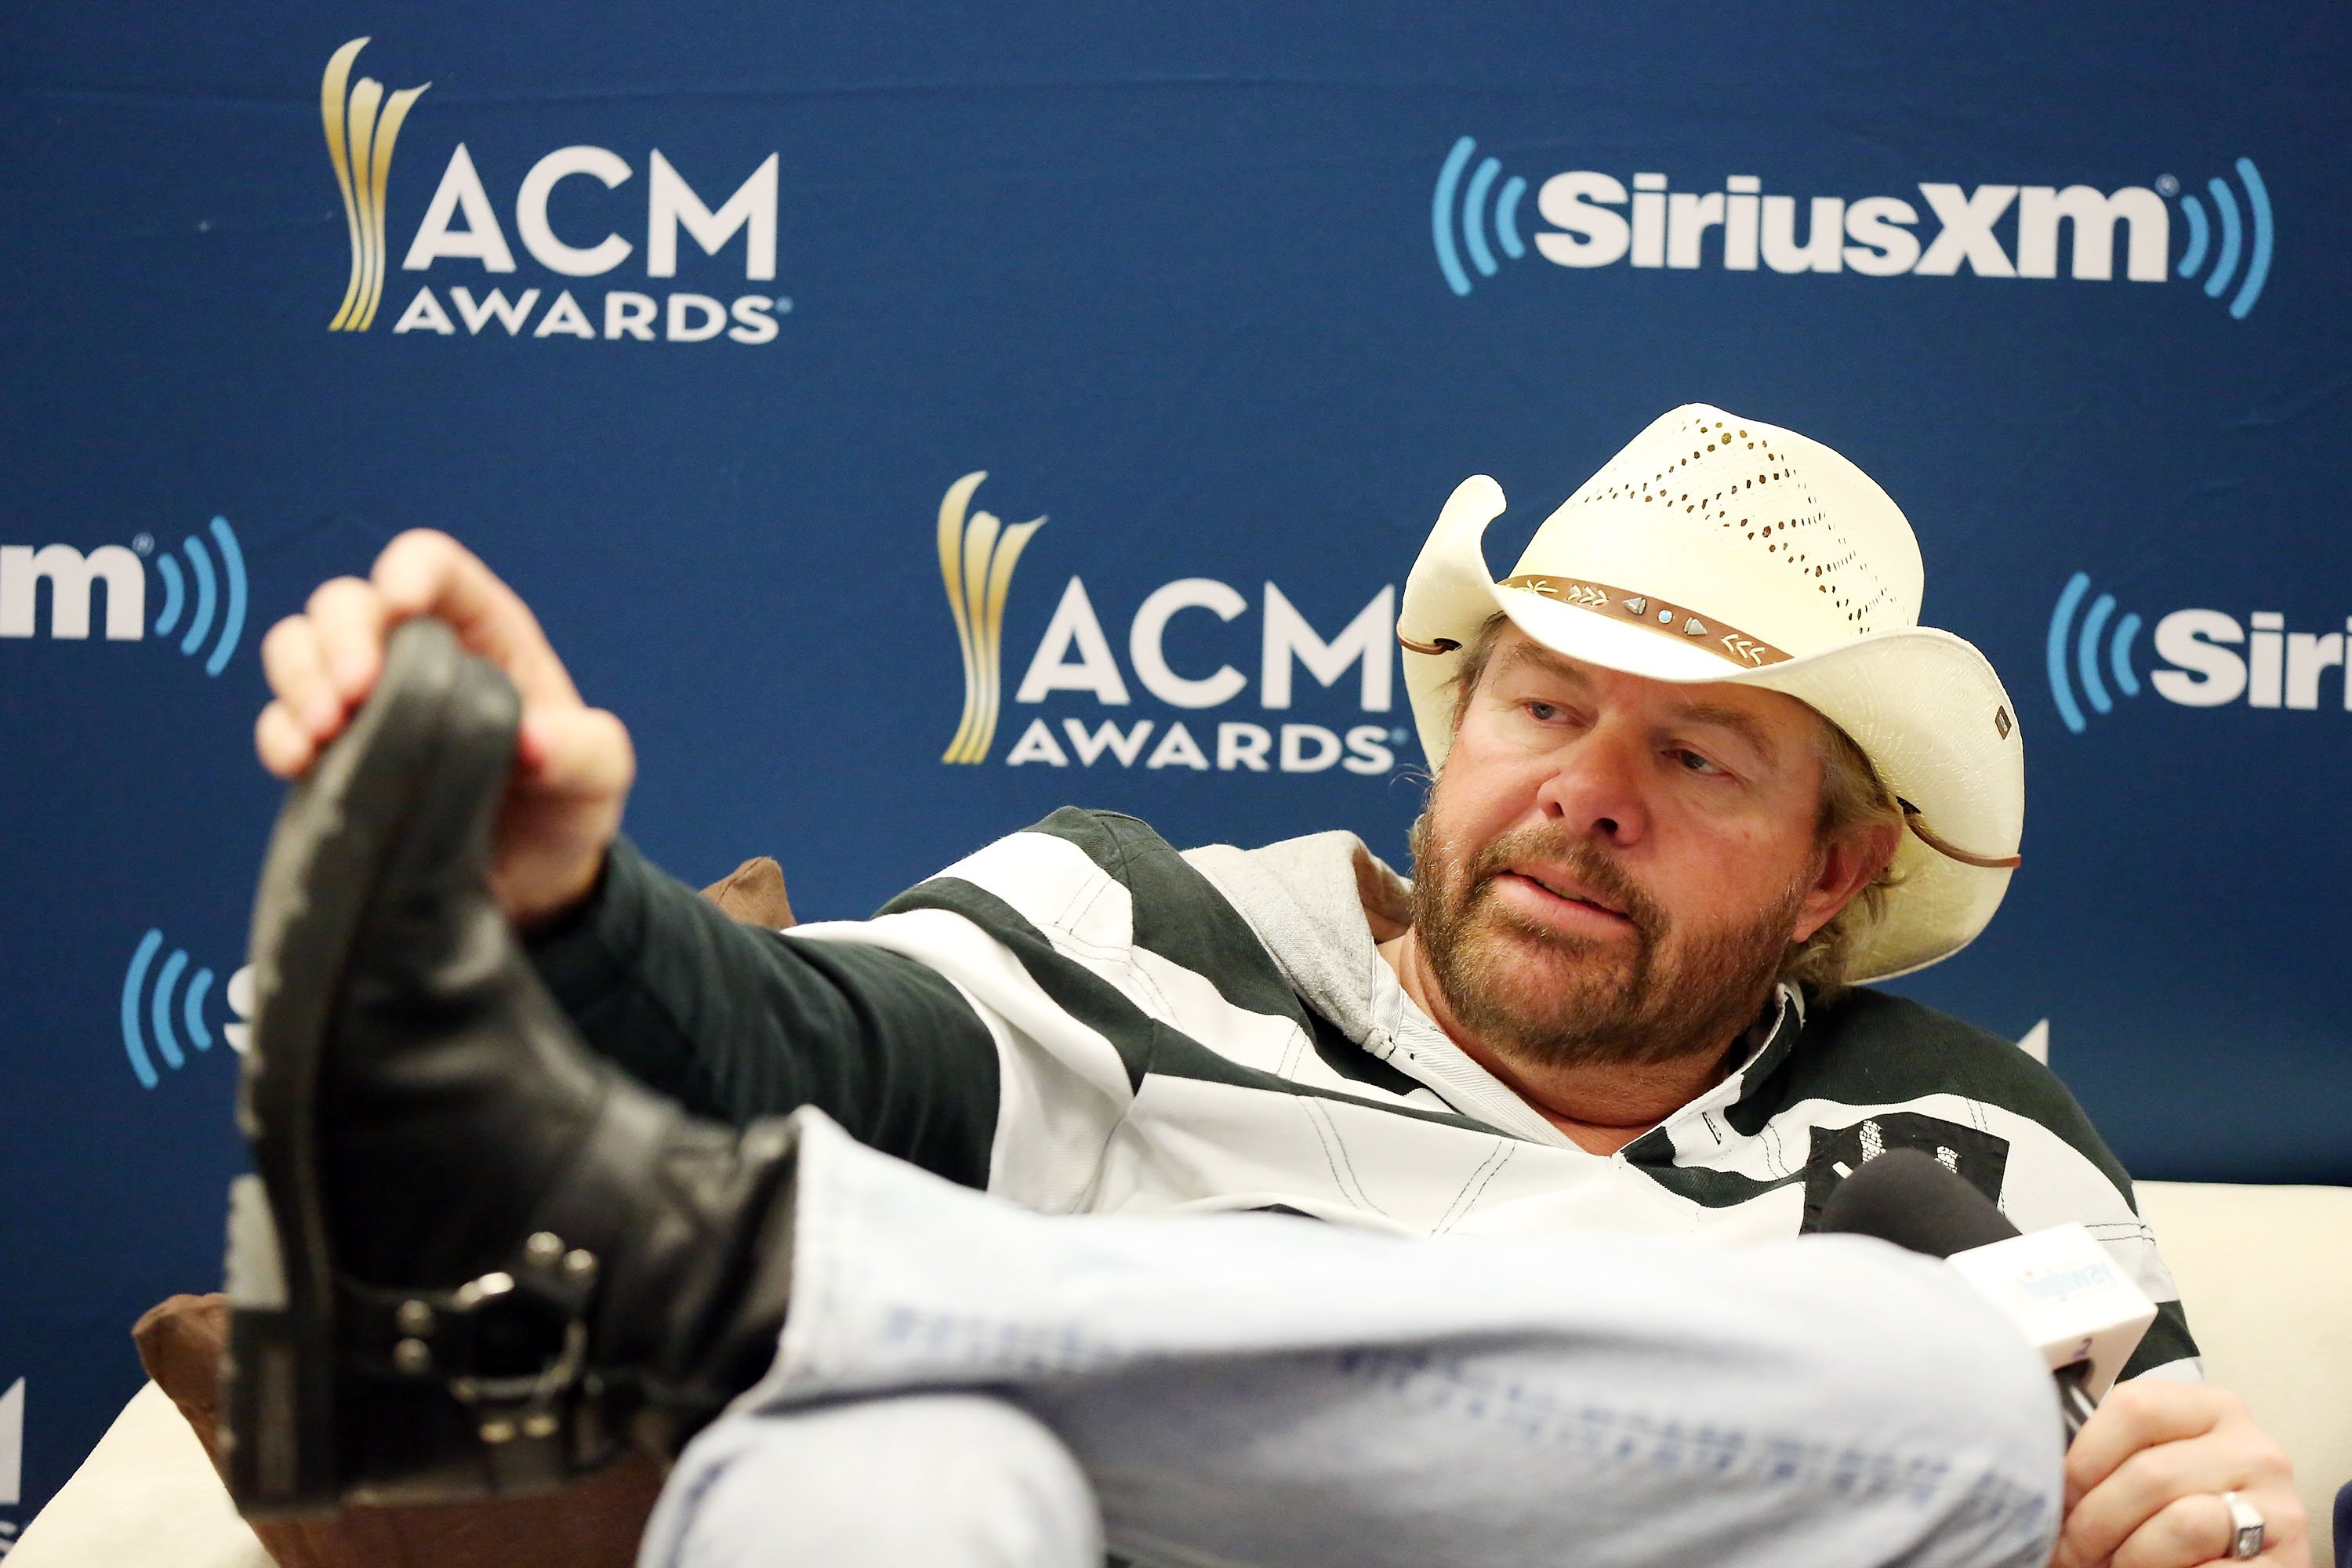 Toby Keith attends SiriusXM's The Highway channel broadcast backstage at the Academy of Country Music Awards on April 14, 2018, in Las Vegas, Nevada. | Source: Getty Images